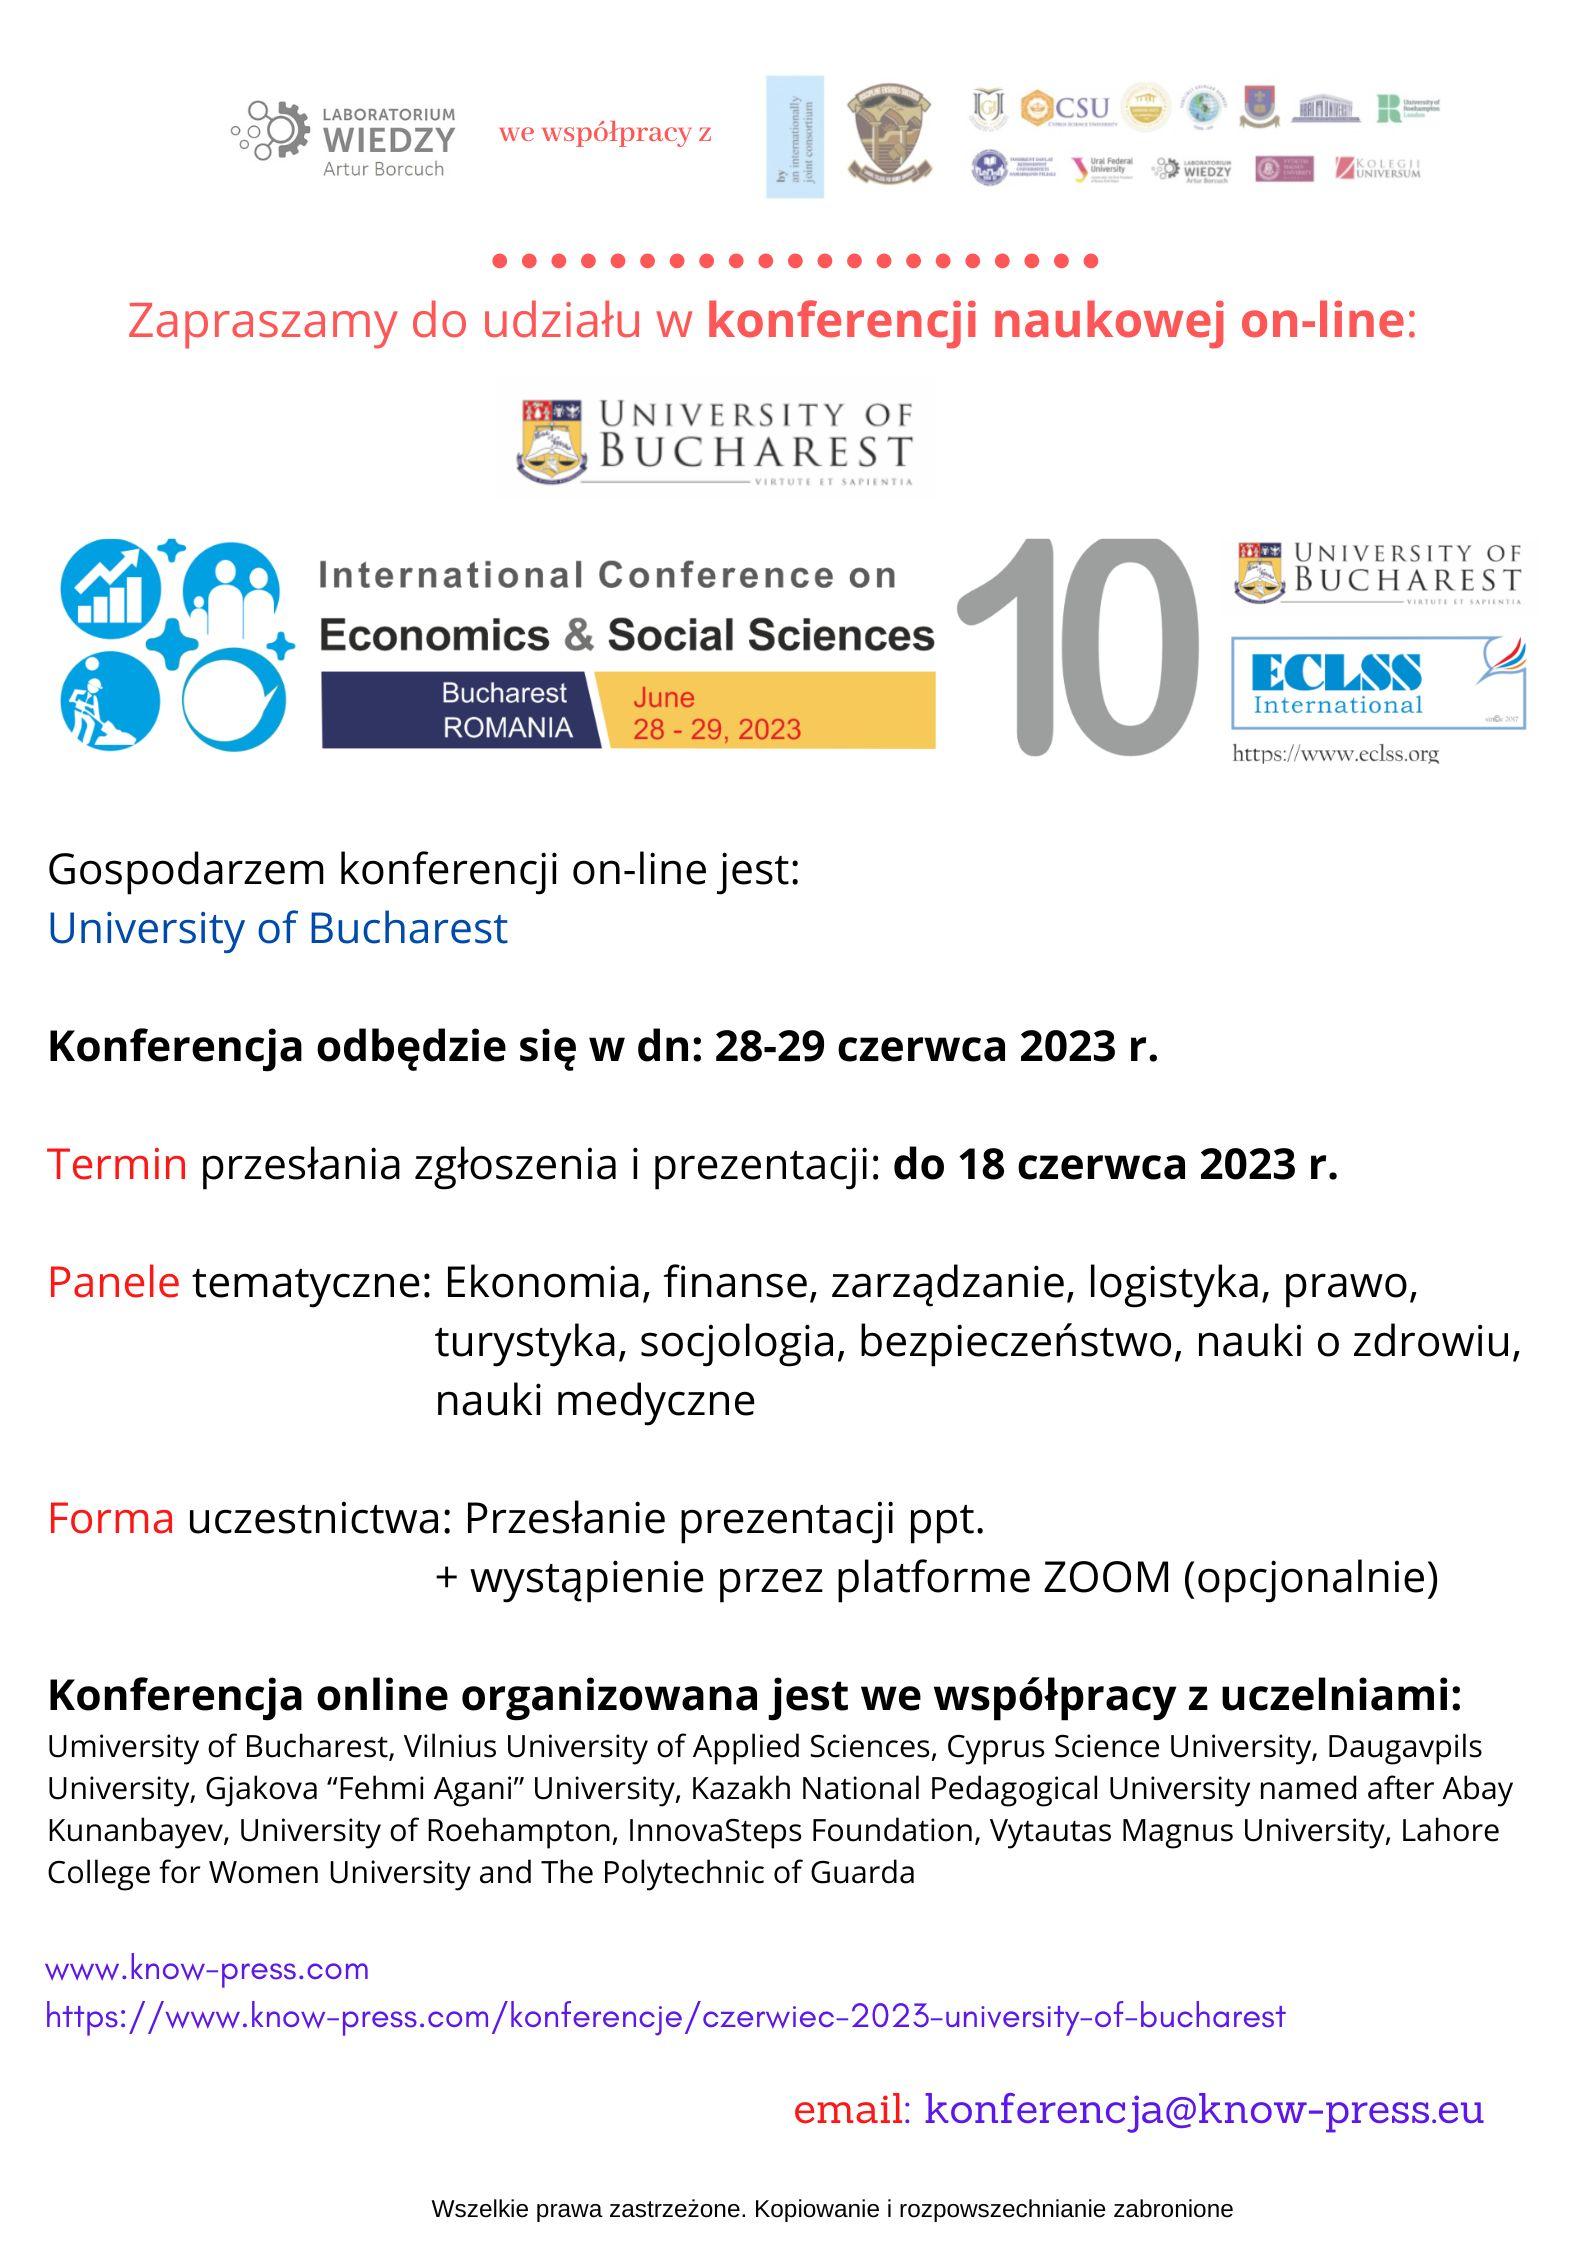 Conference on Economics and Social Sciences (E&SS 2023b)